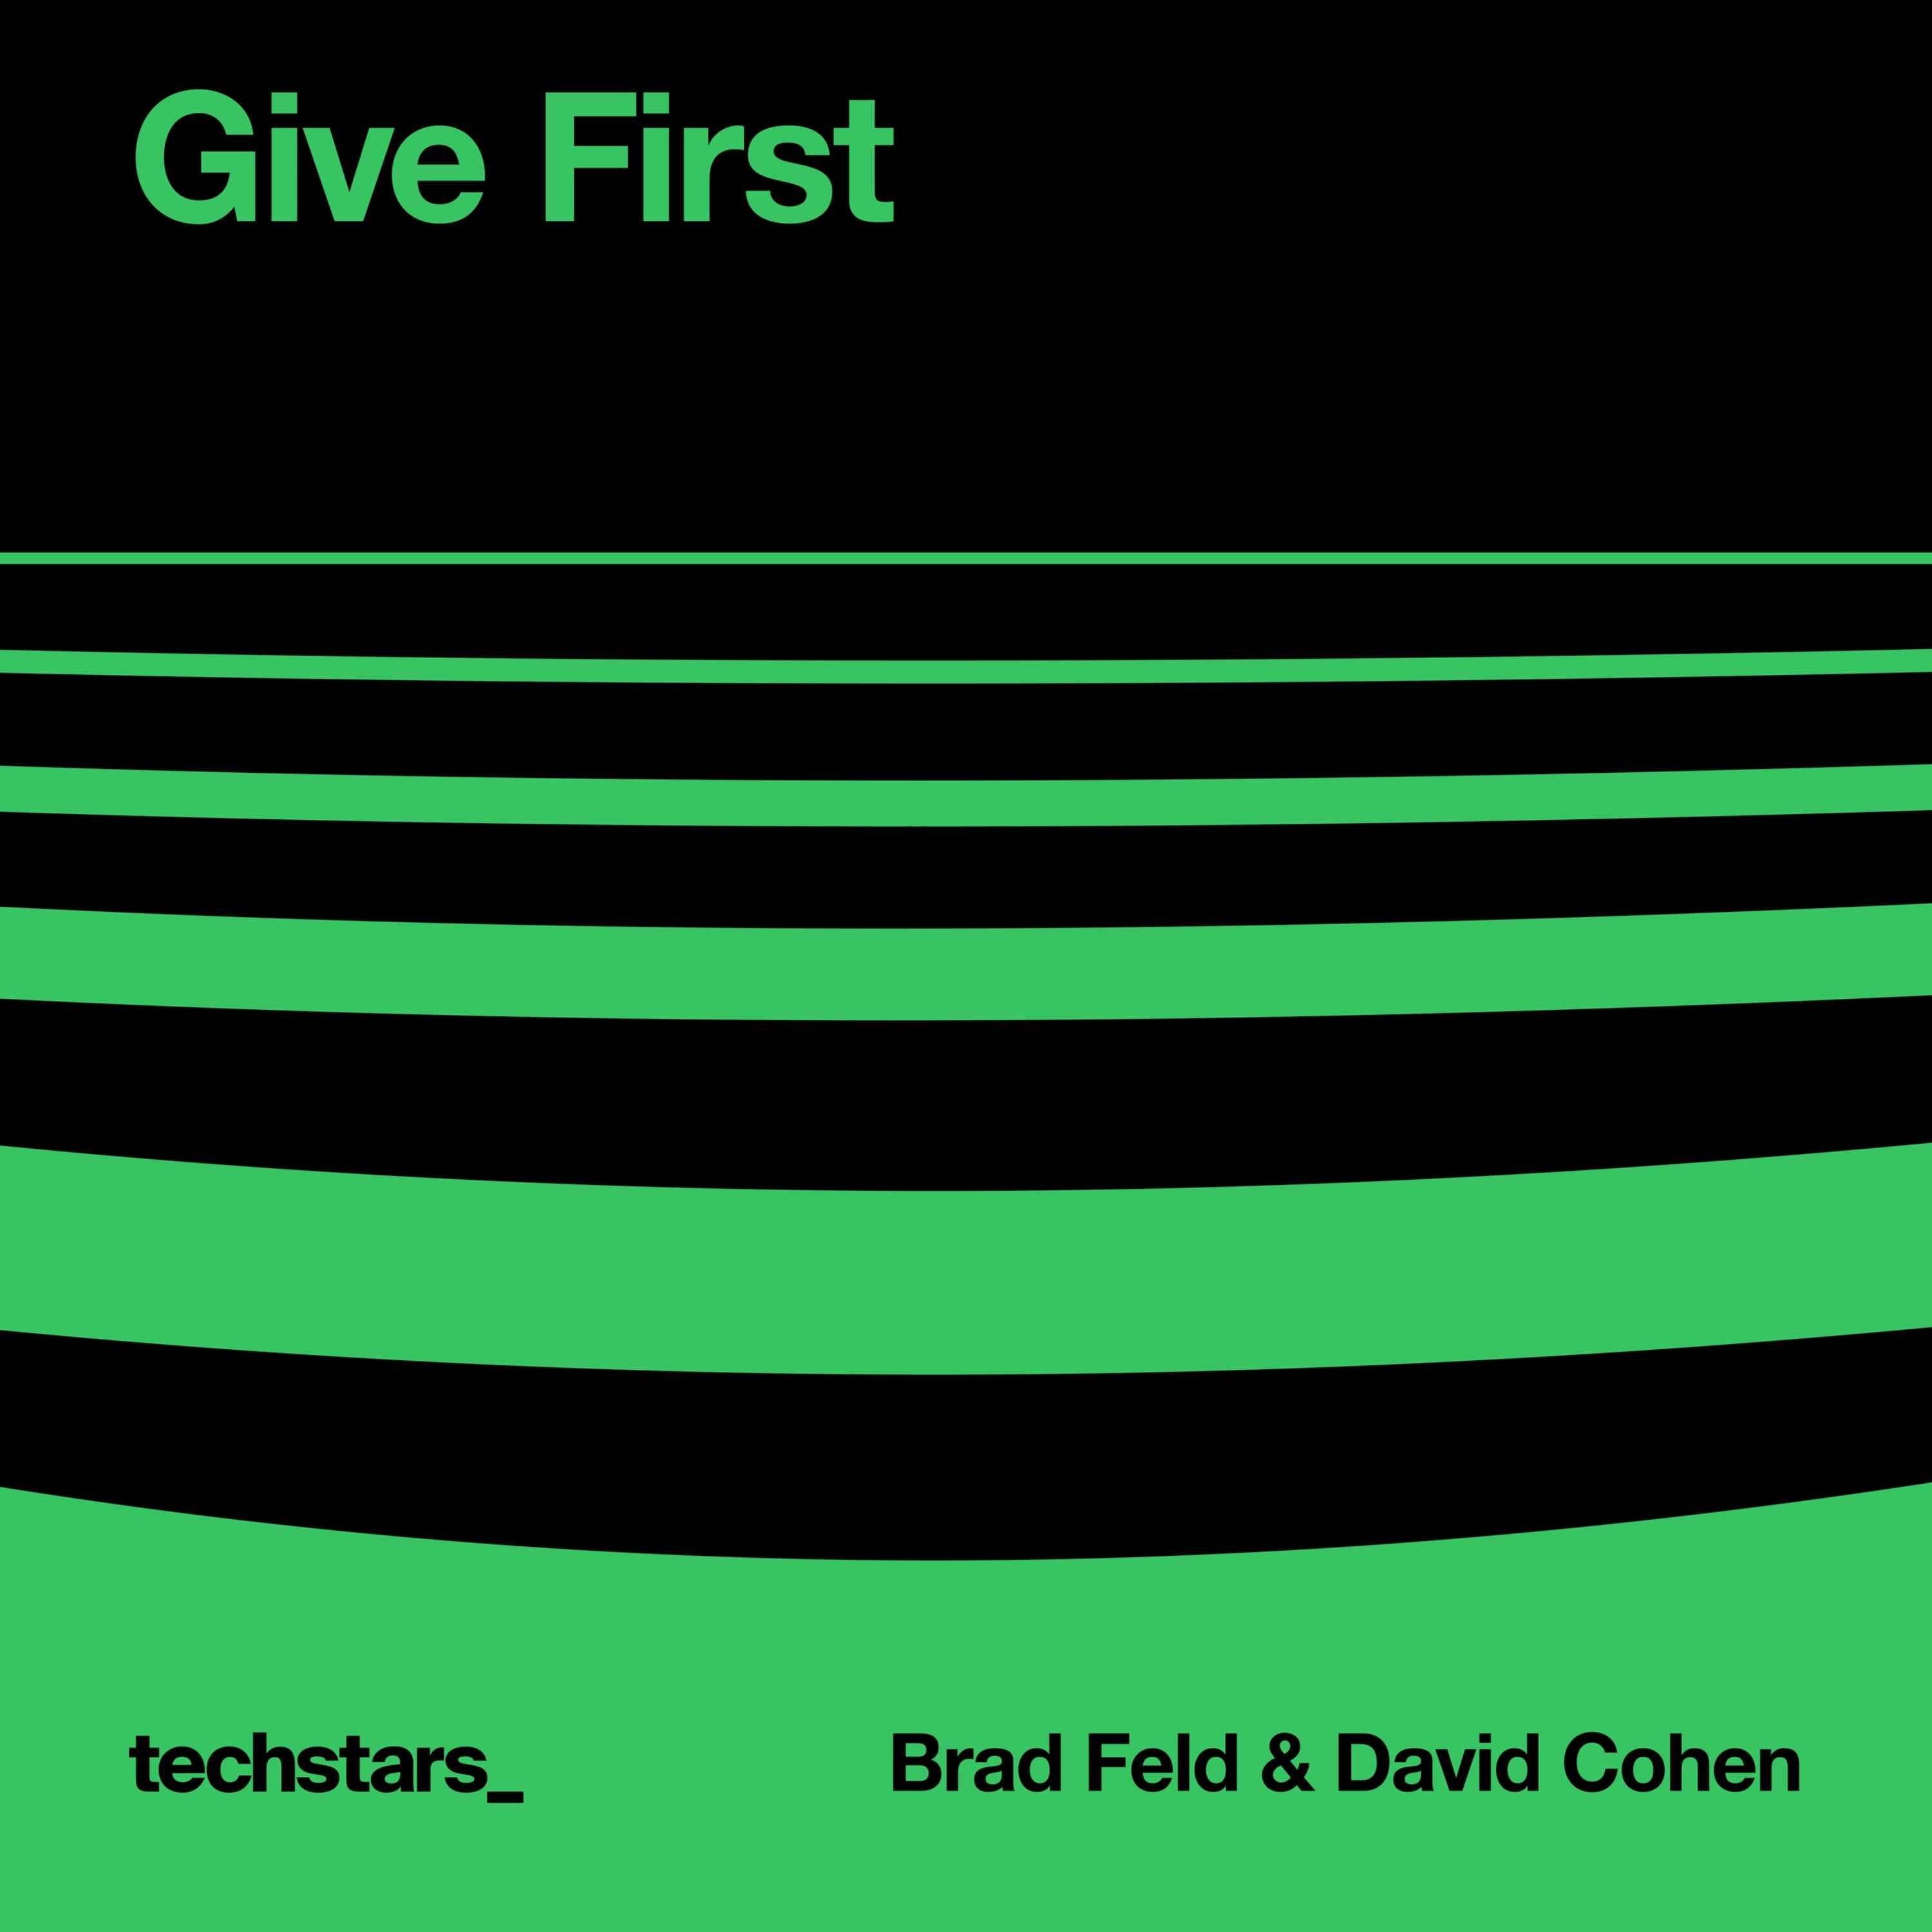 Give First